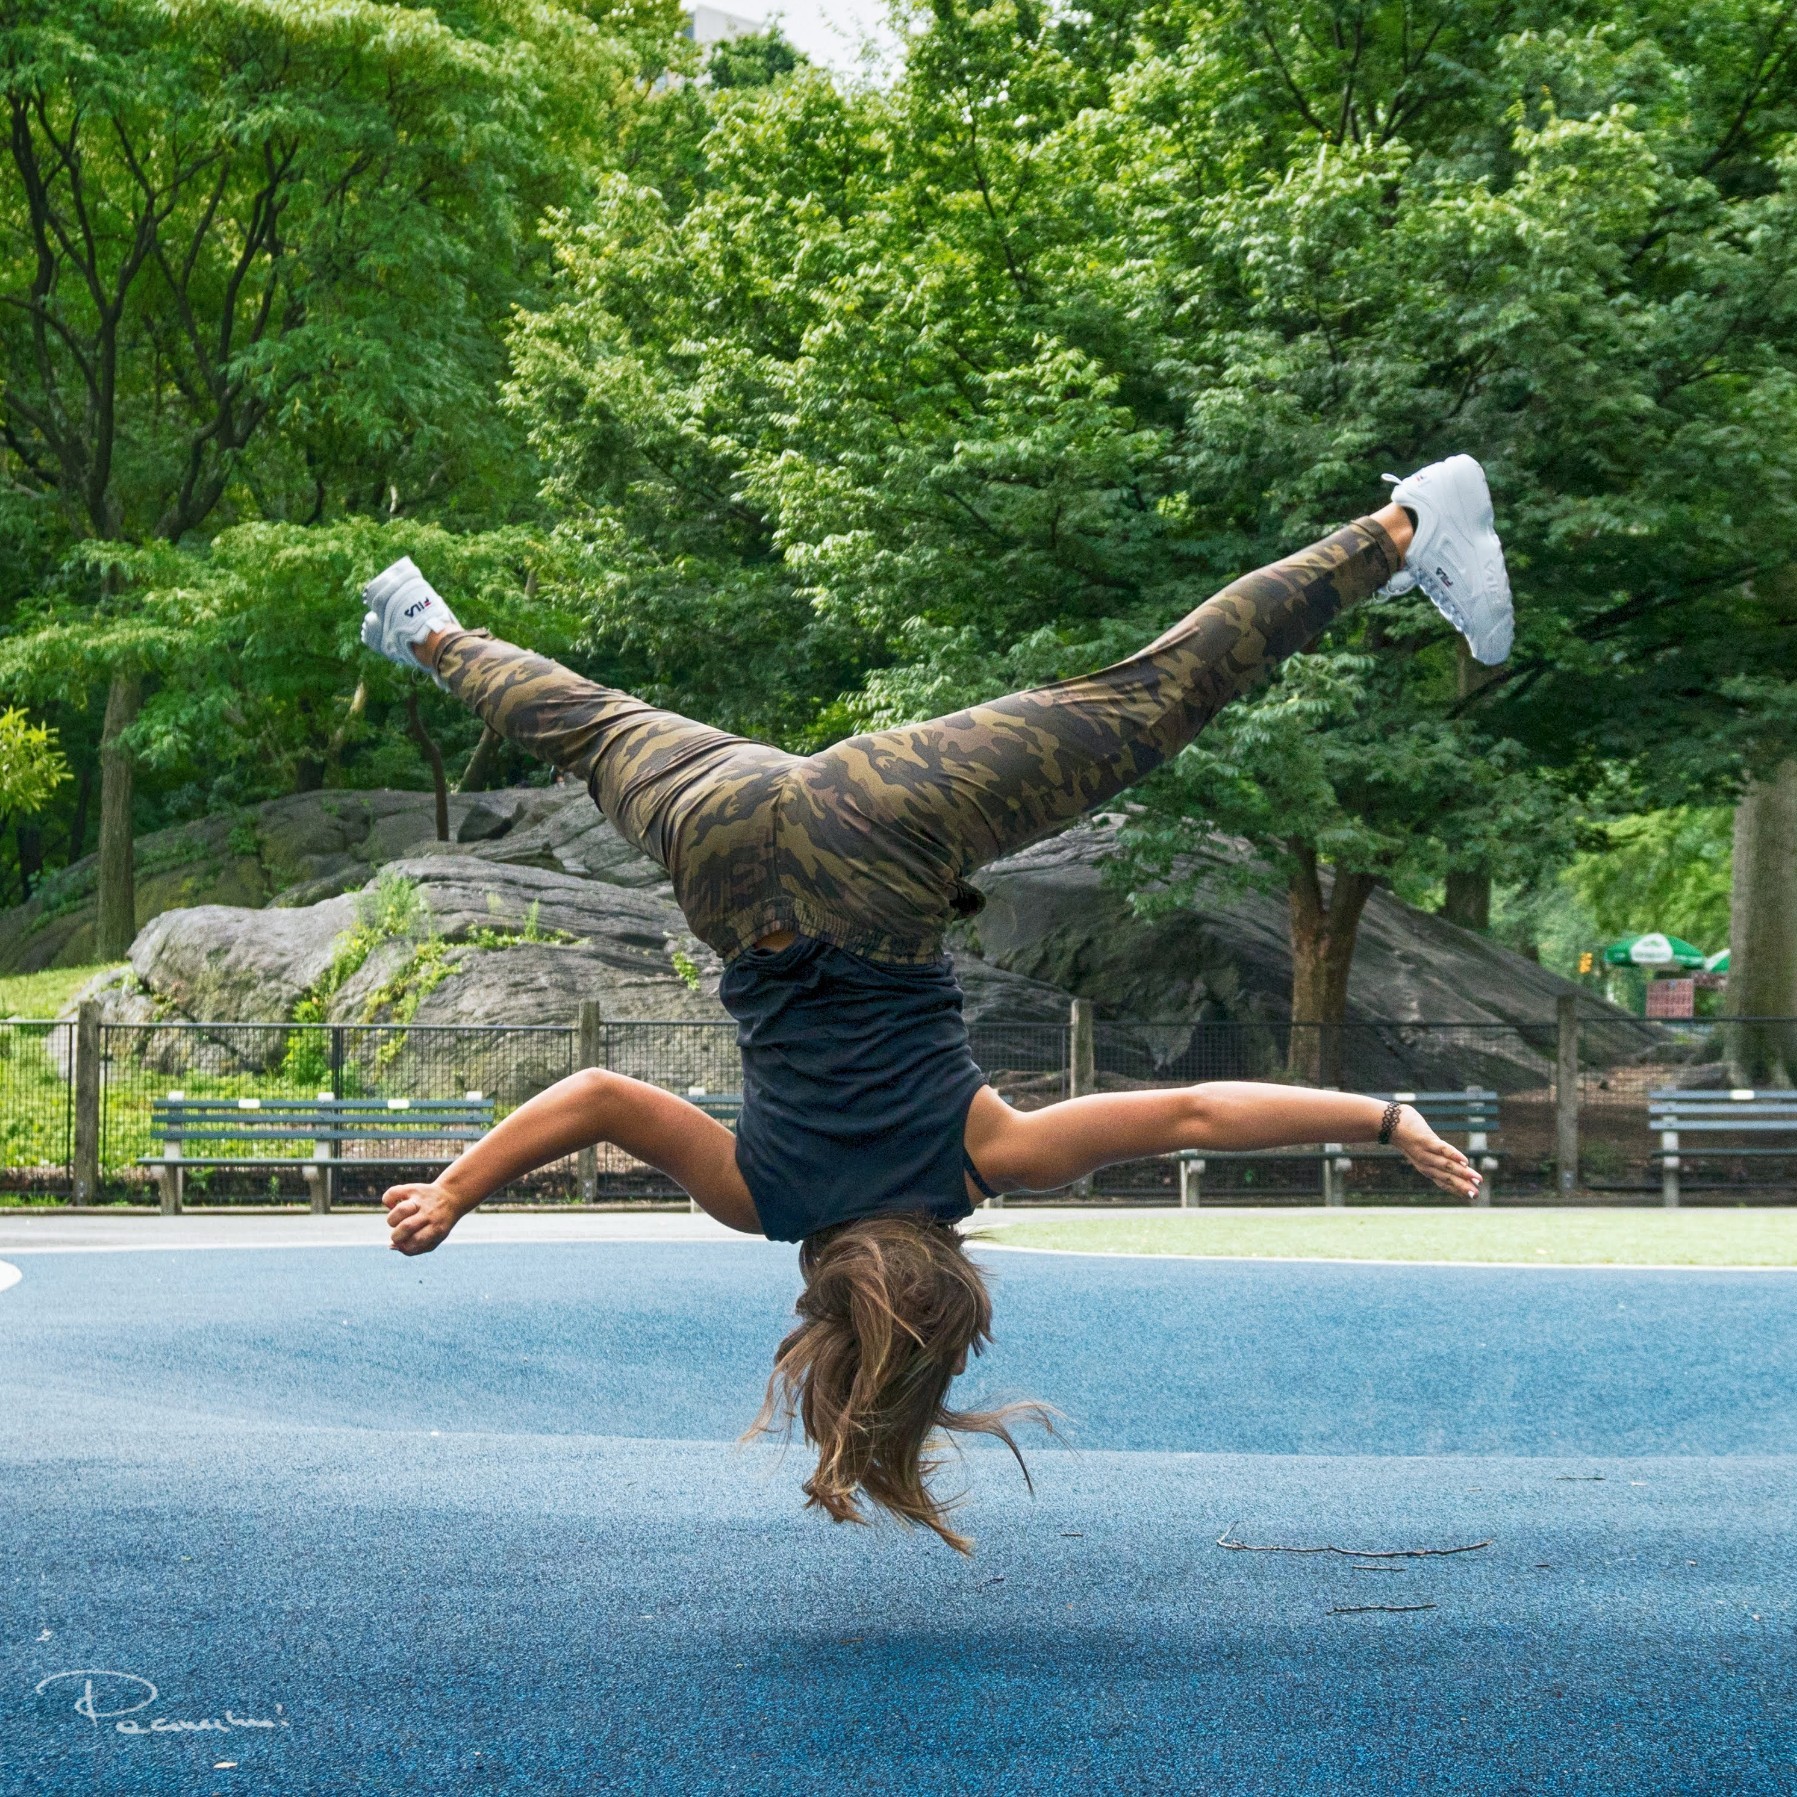 A jump in Central Park - NY-...